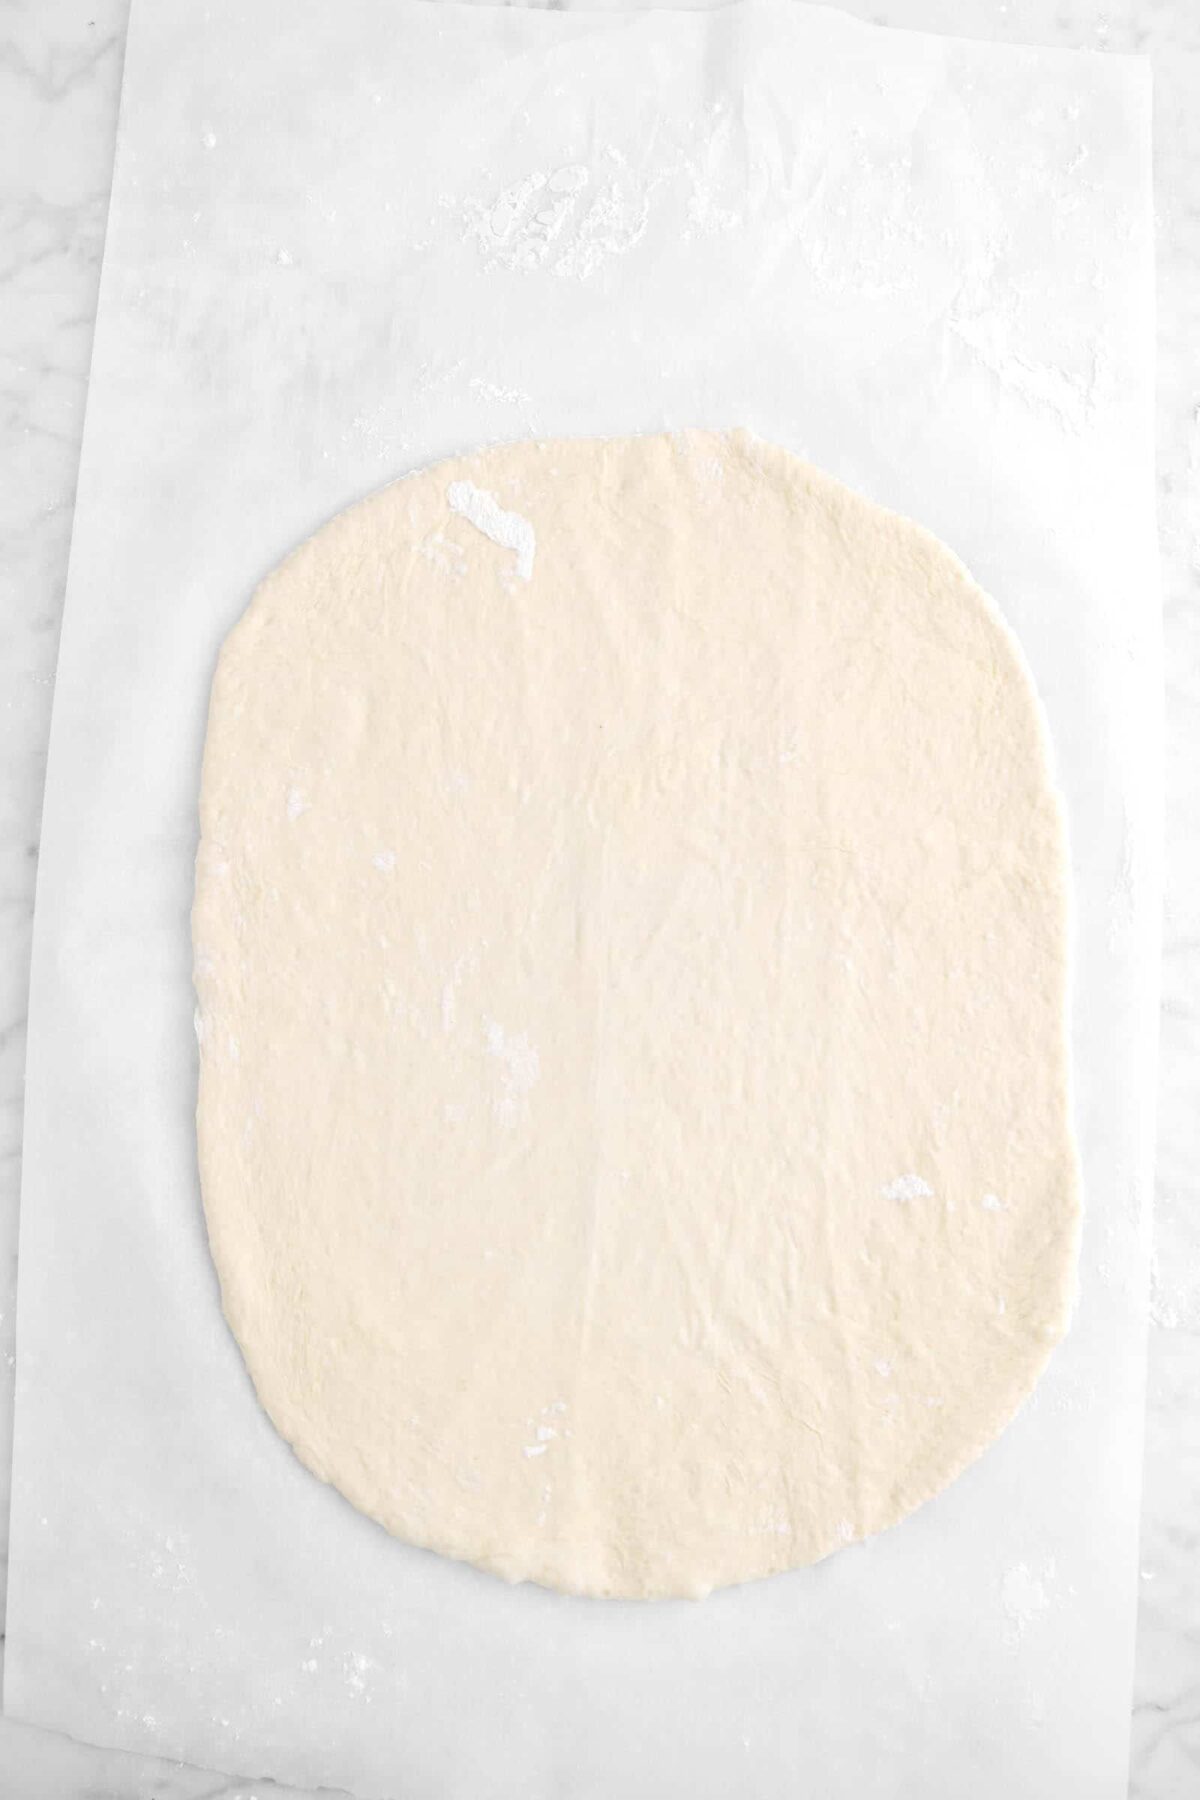 rolled out pizza dough on parchment paper